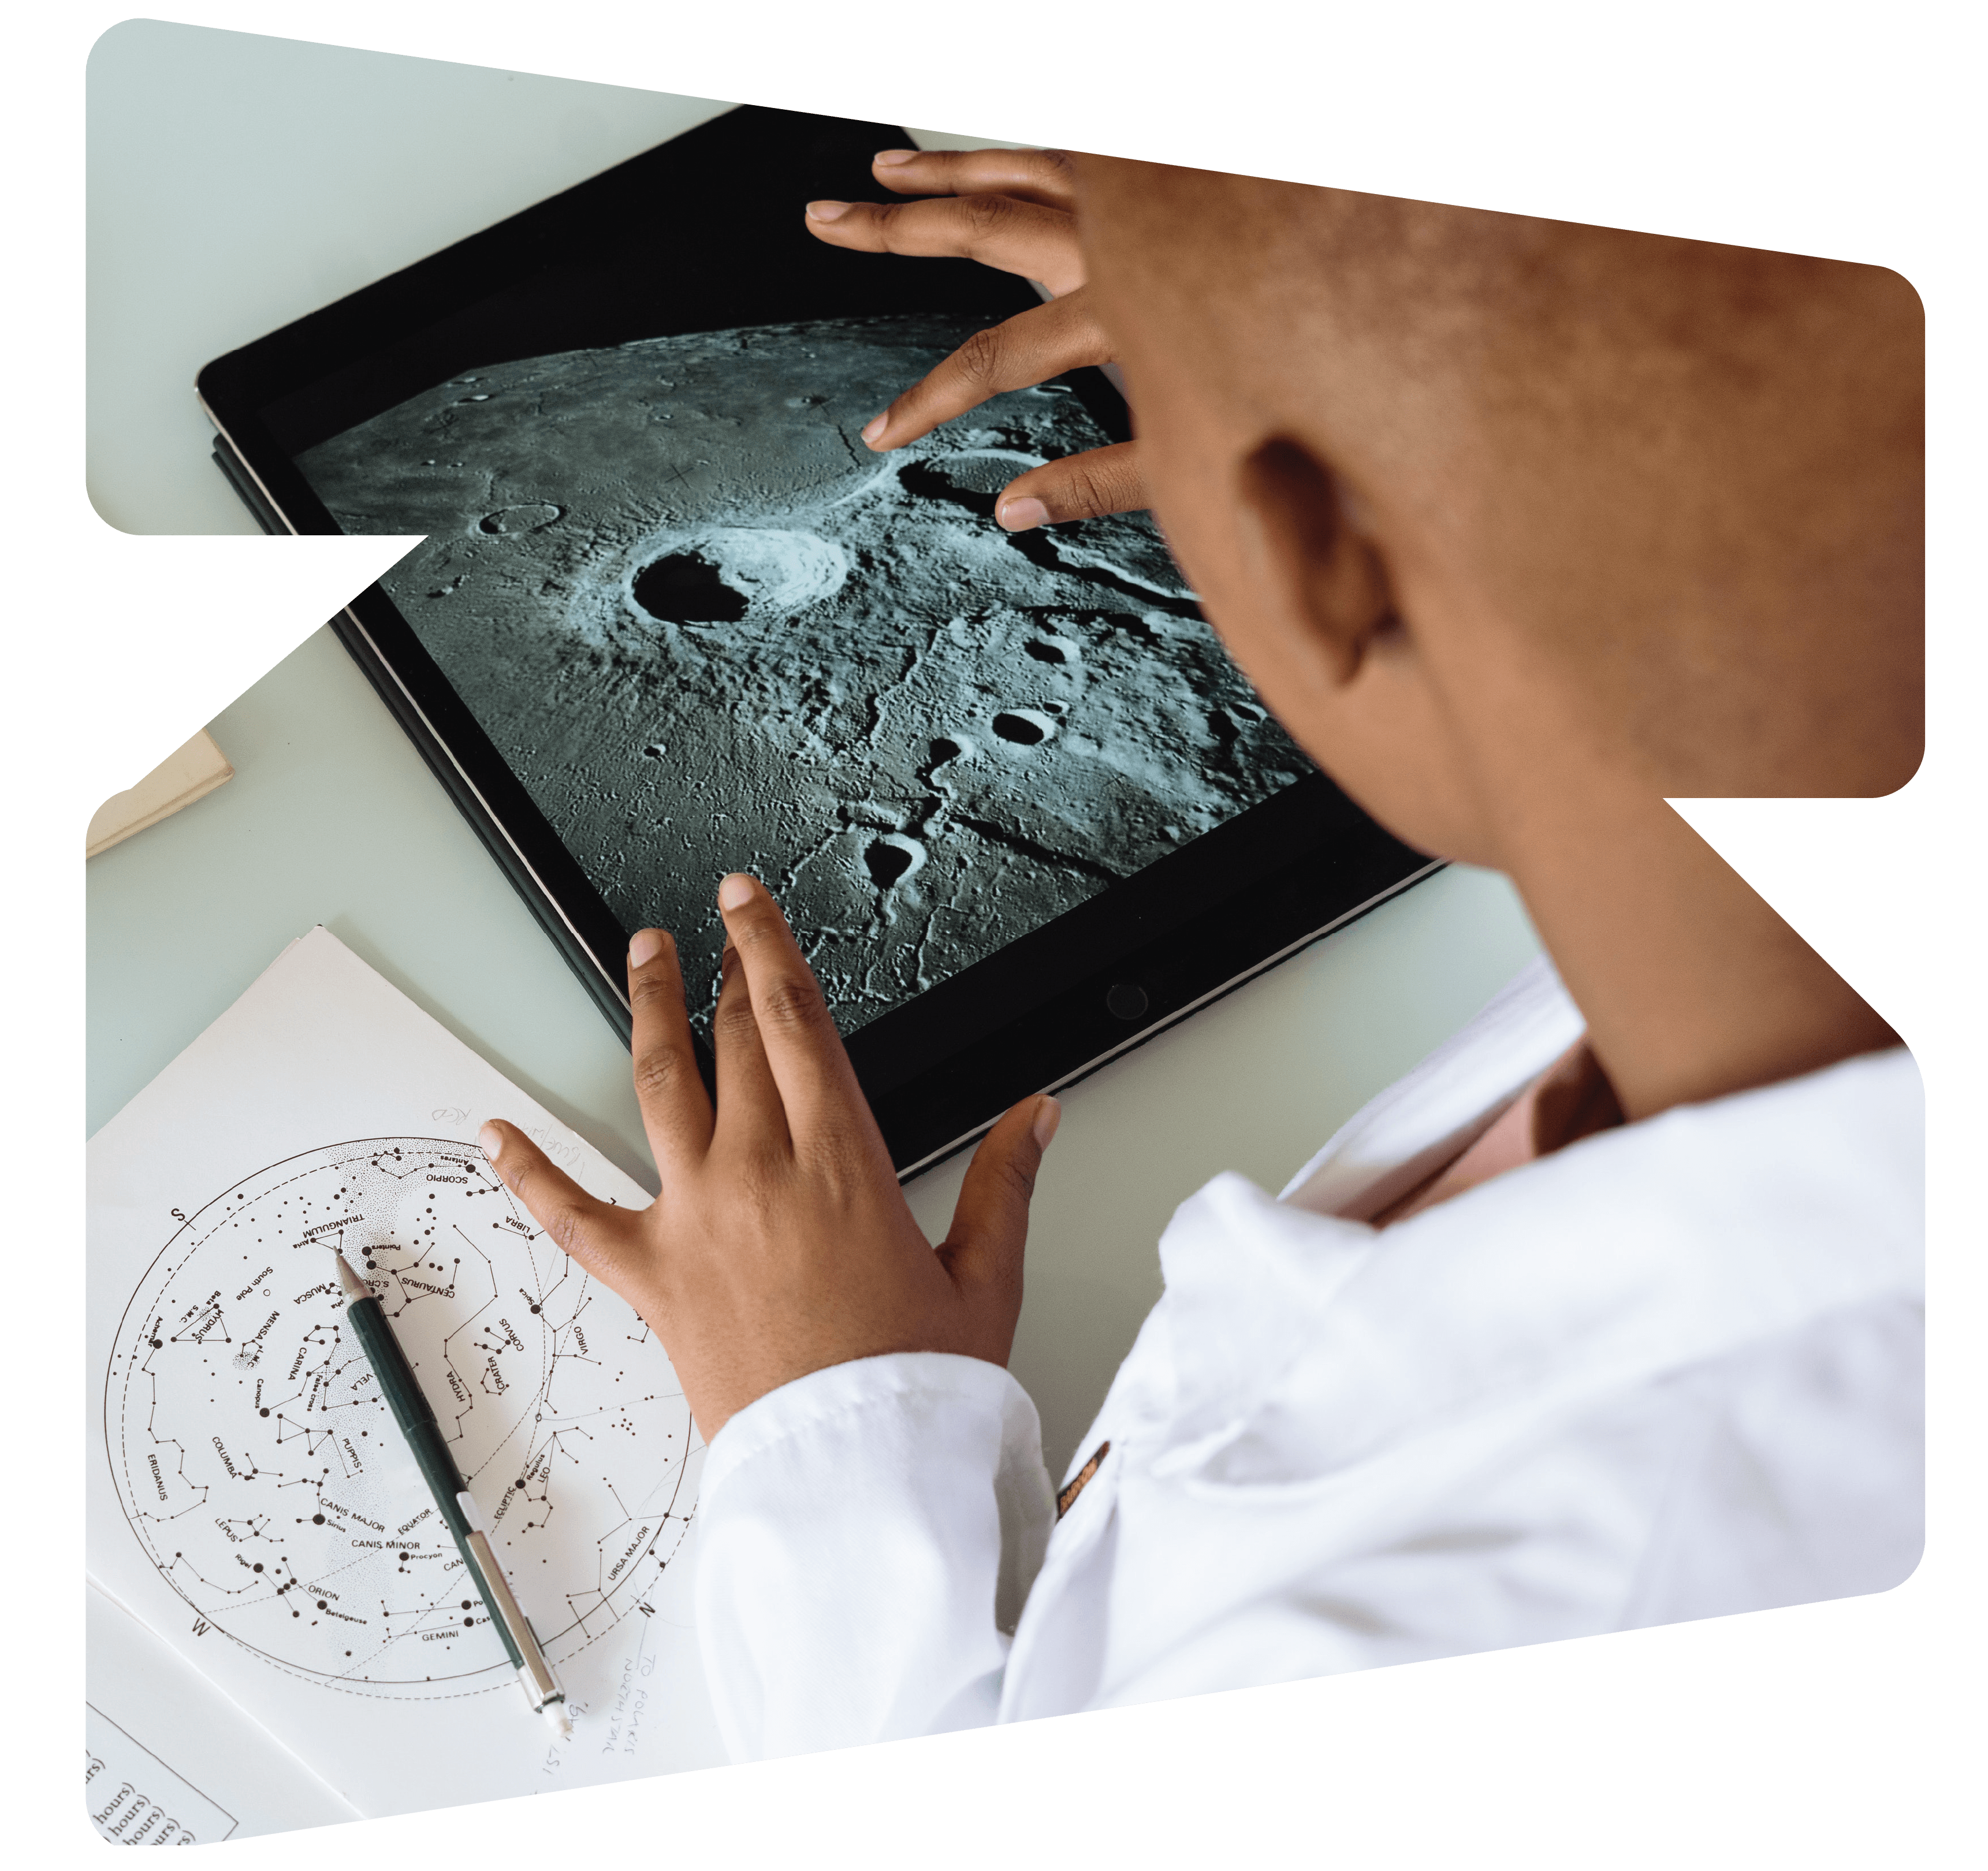 Student zooming in on an image of the moon on a tablet